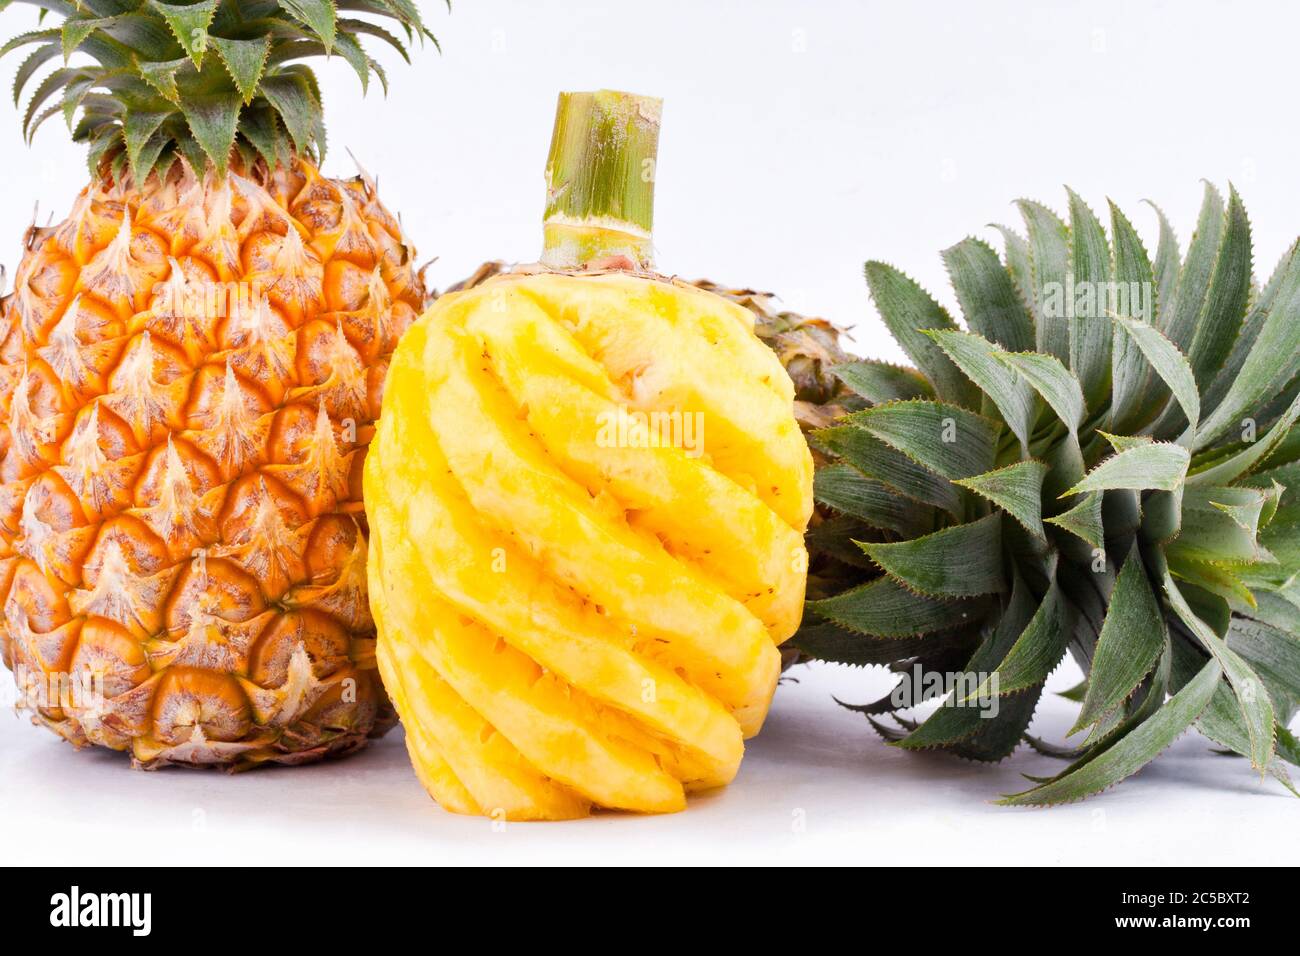 peeled  pineapple  on white background healthy pineapple fruit food isolated Stock Photo